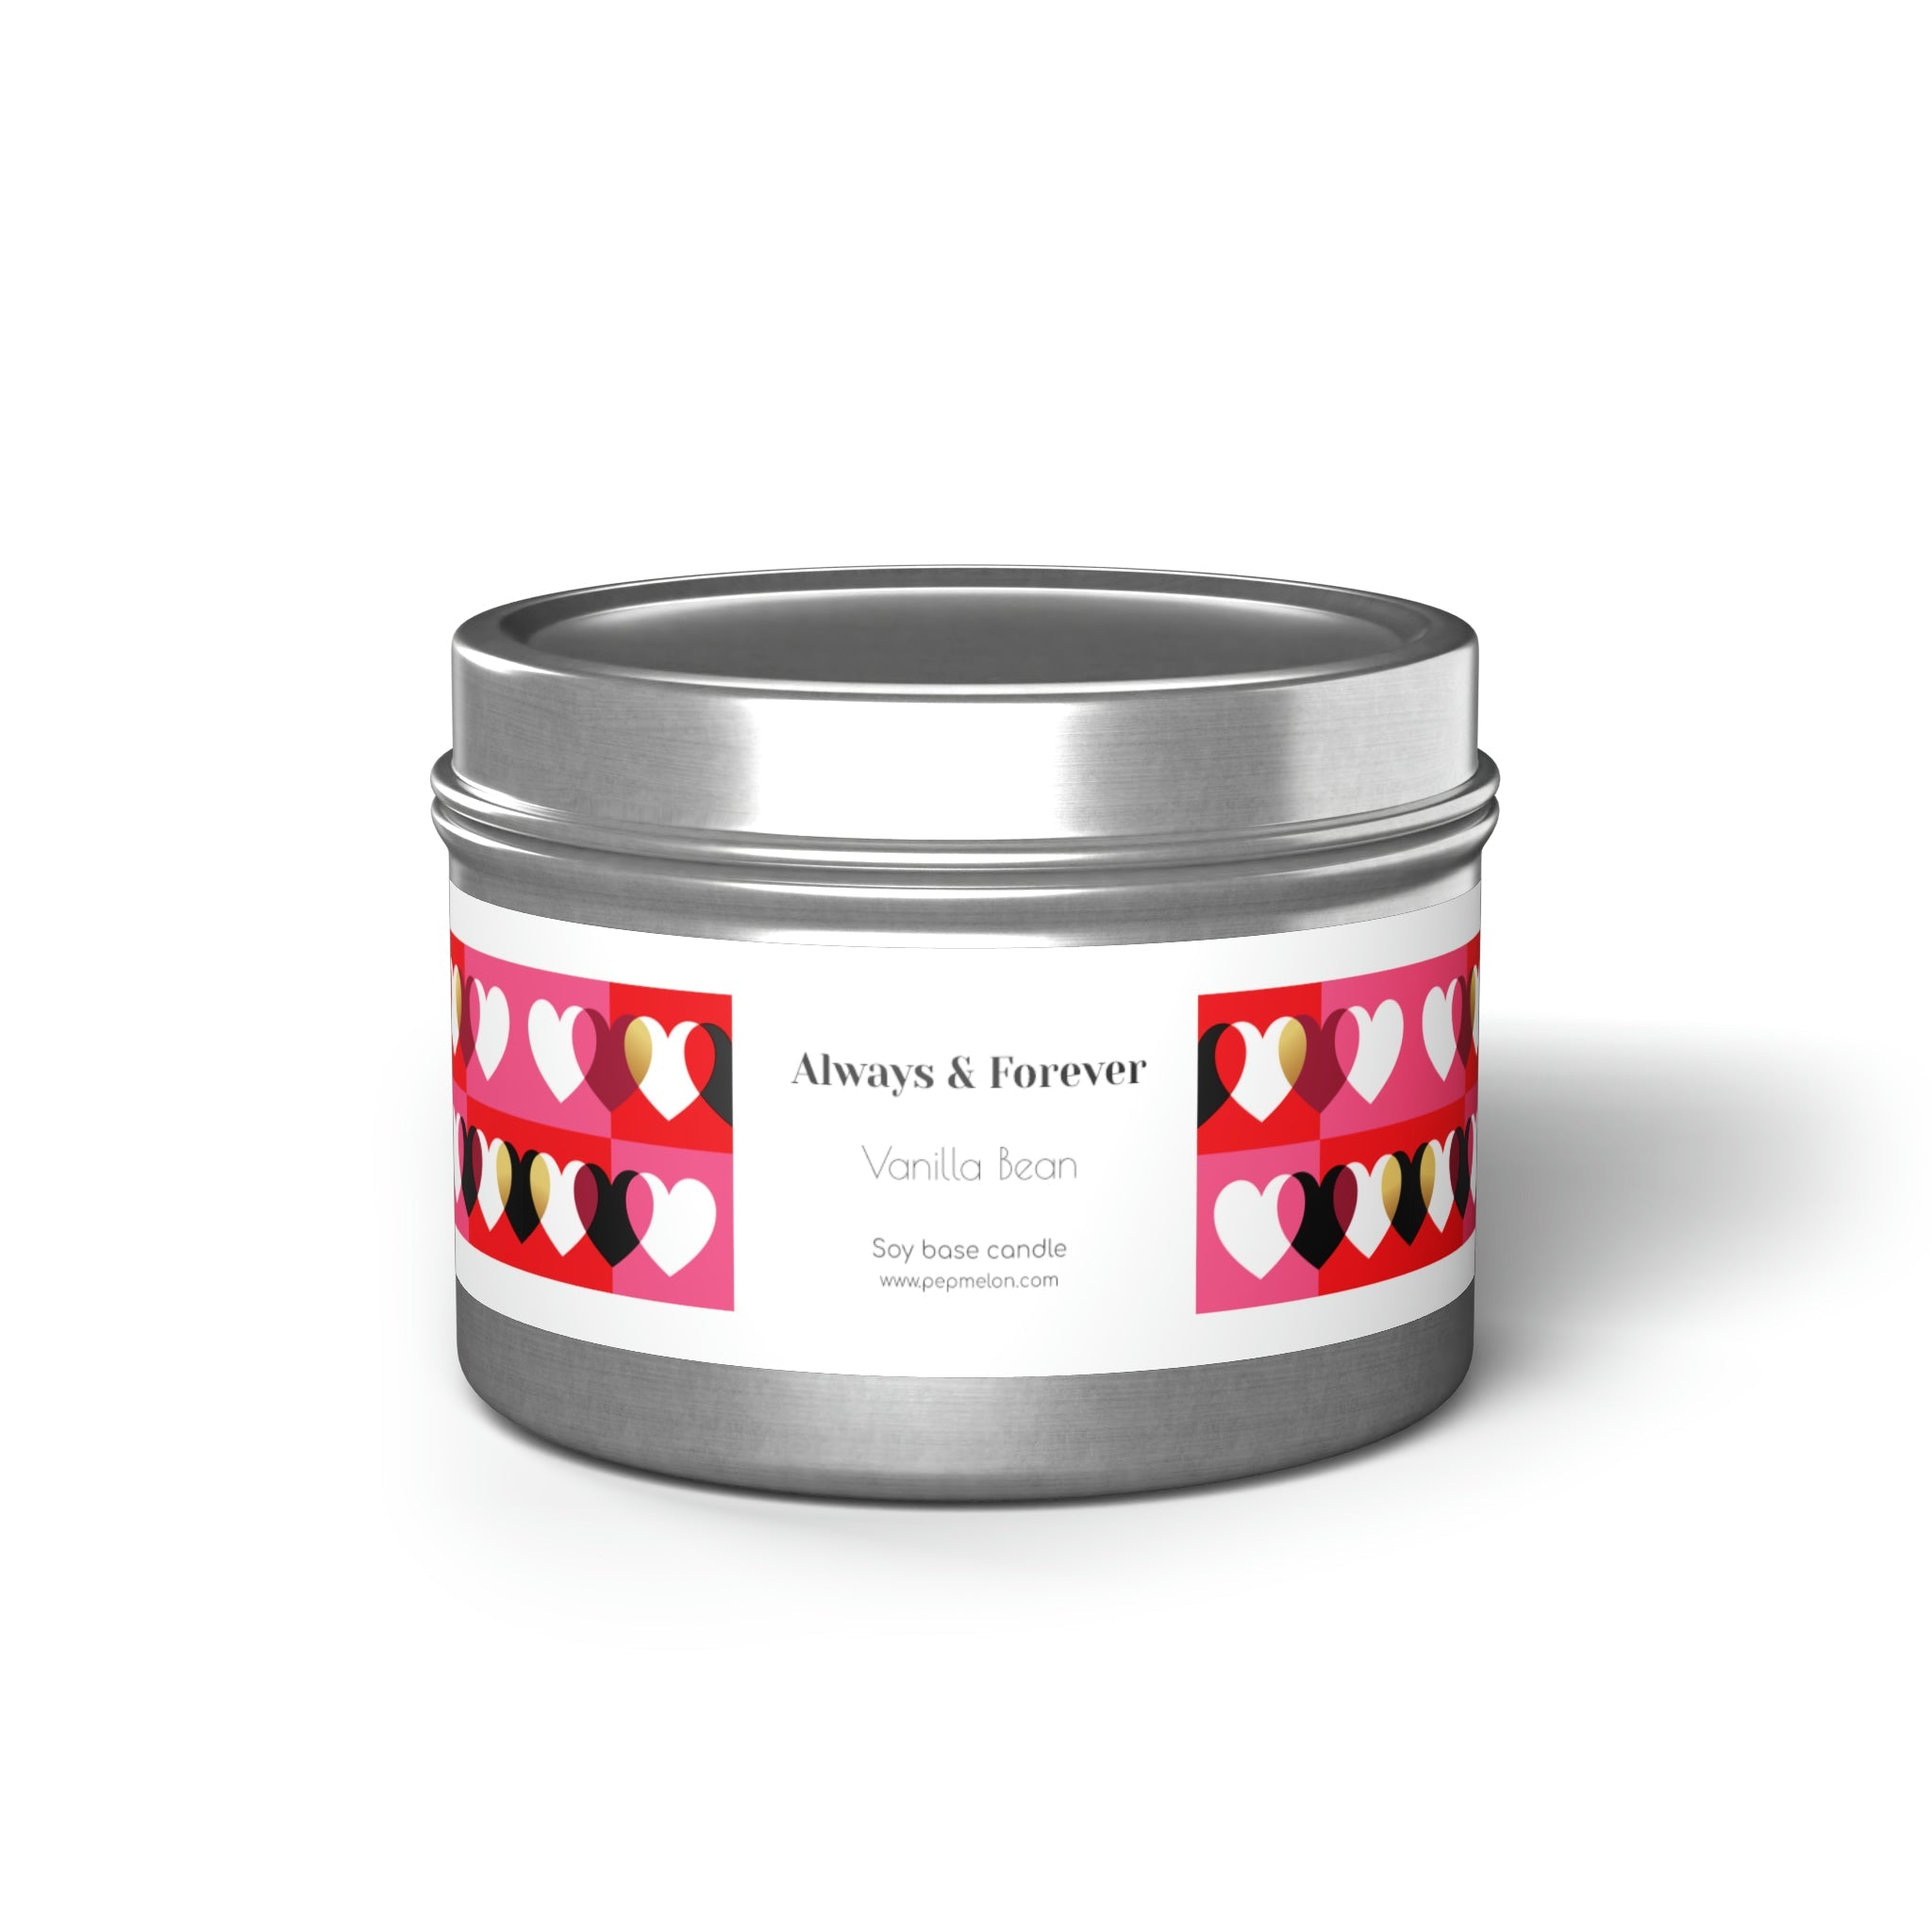 Vanilla Bean Always & Forever Soy base candle love, valentine's day gift Tin Candles-10